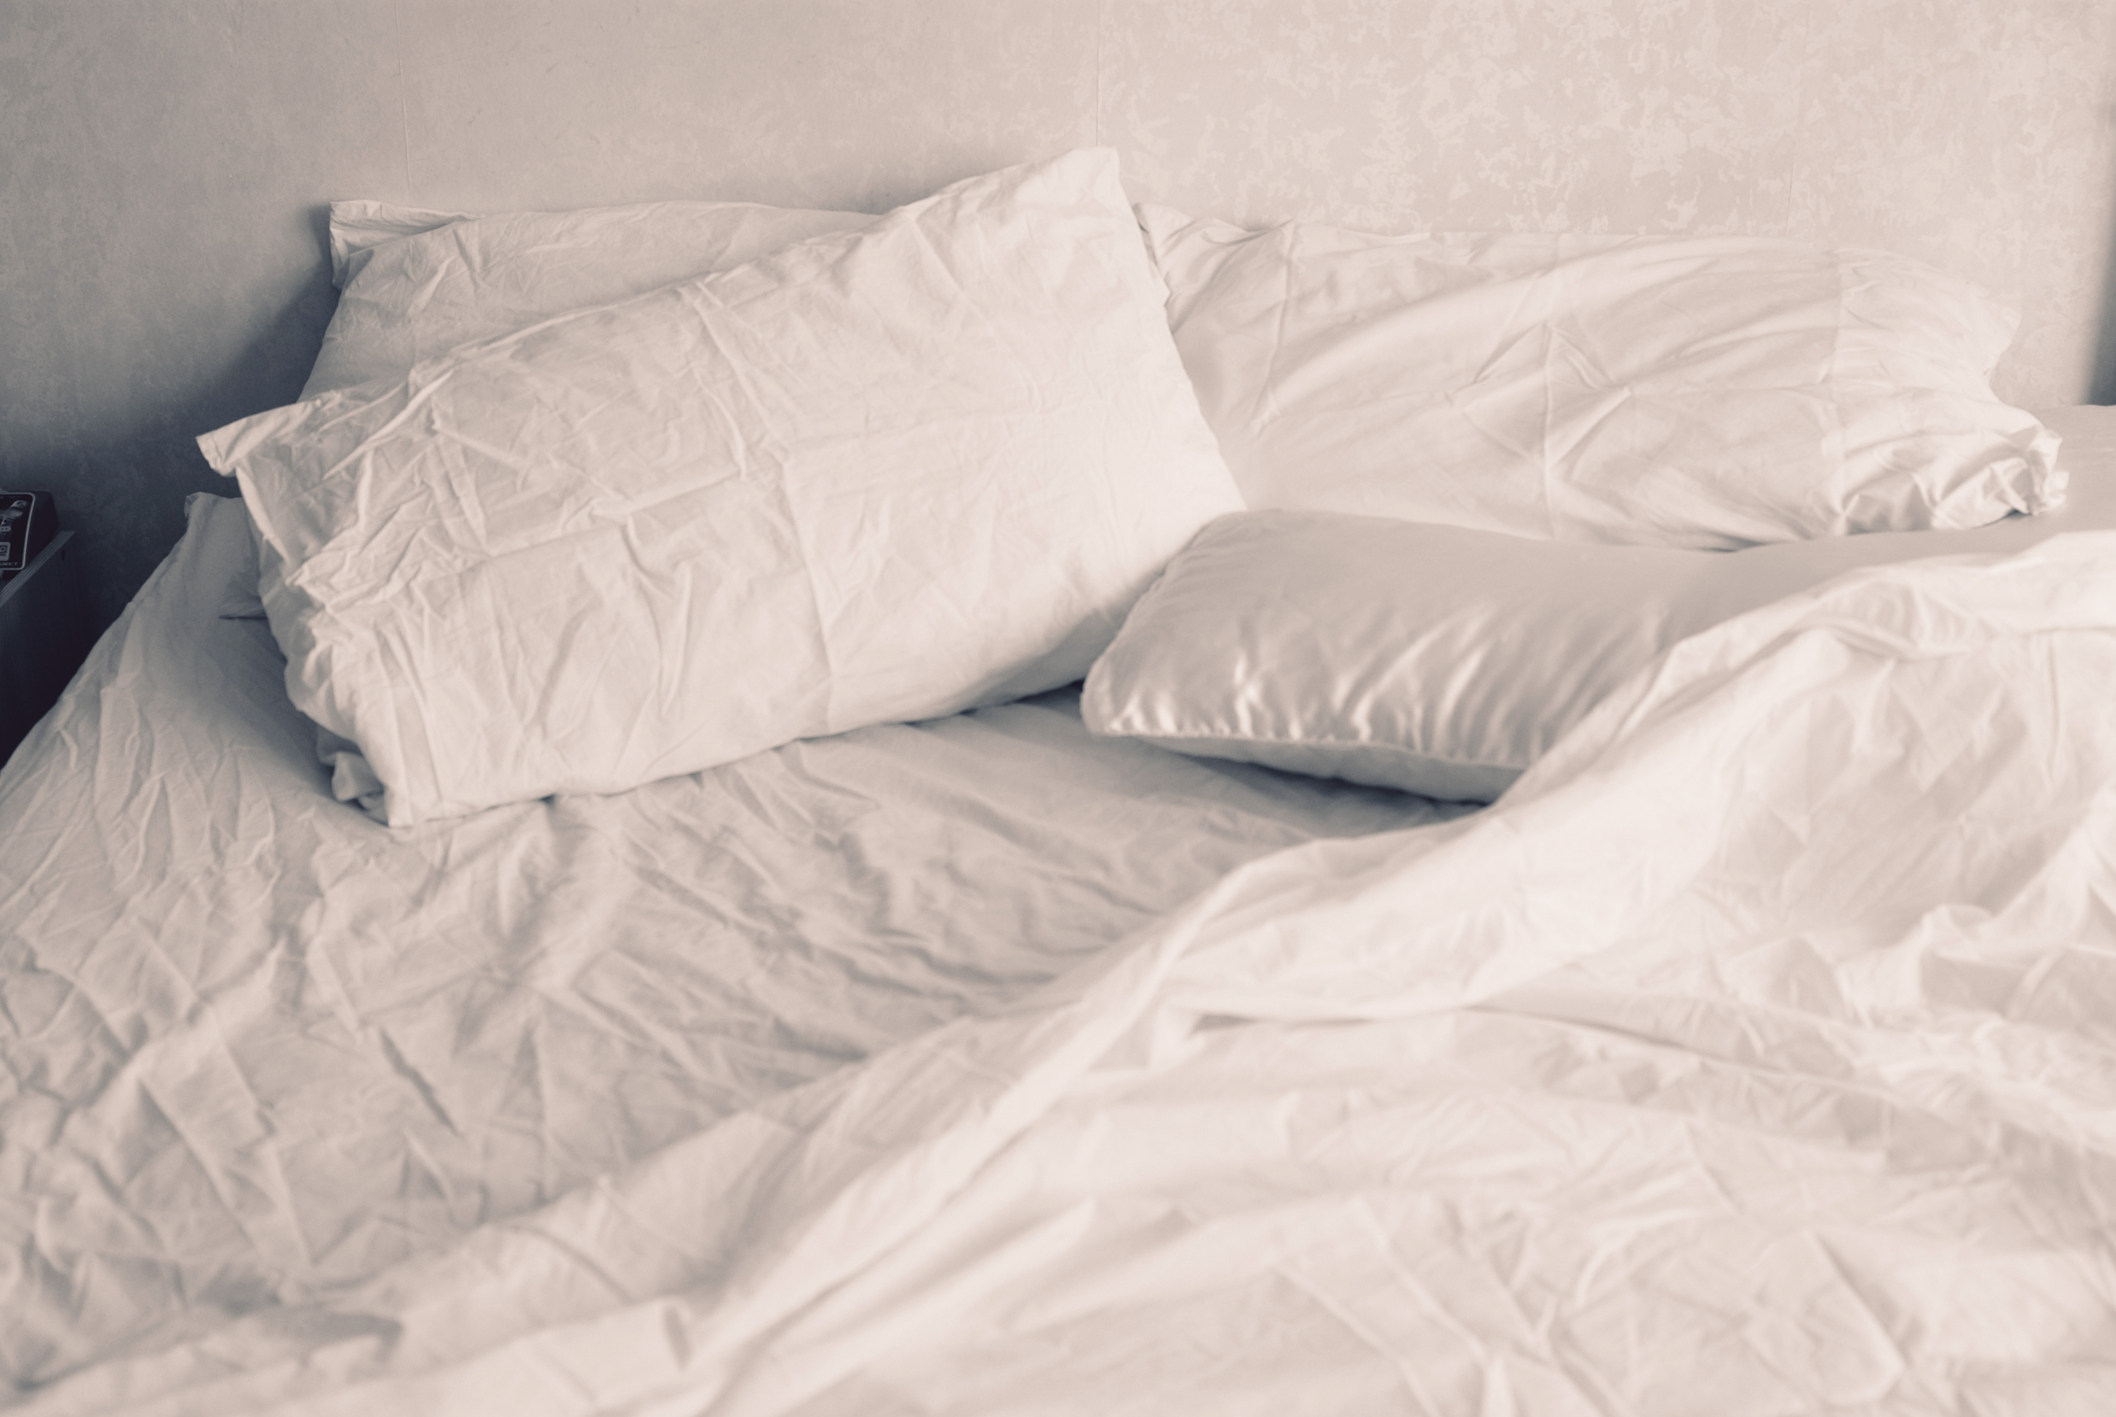 White linen of an unmade bed. (Getty Images)